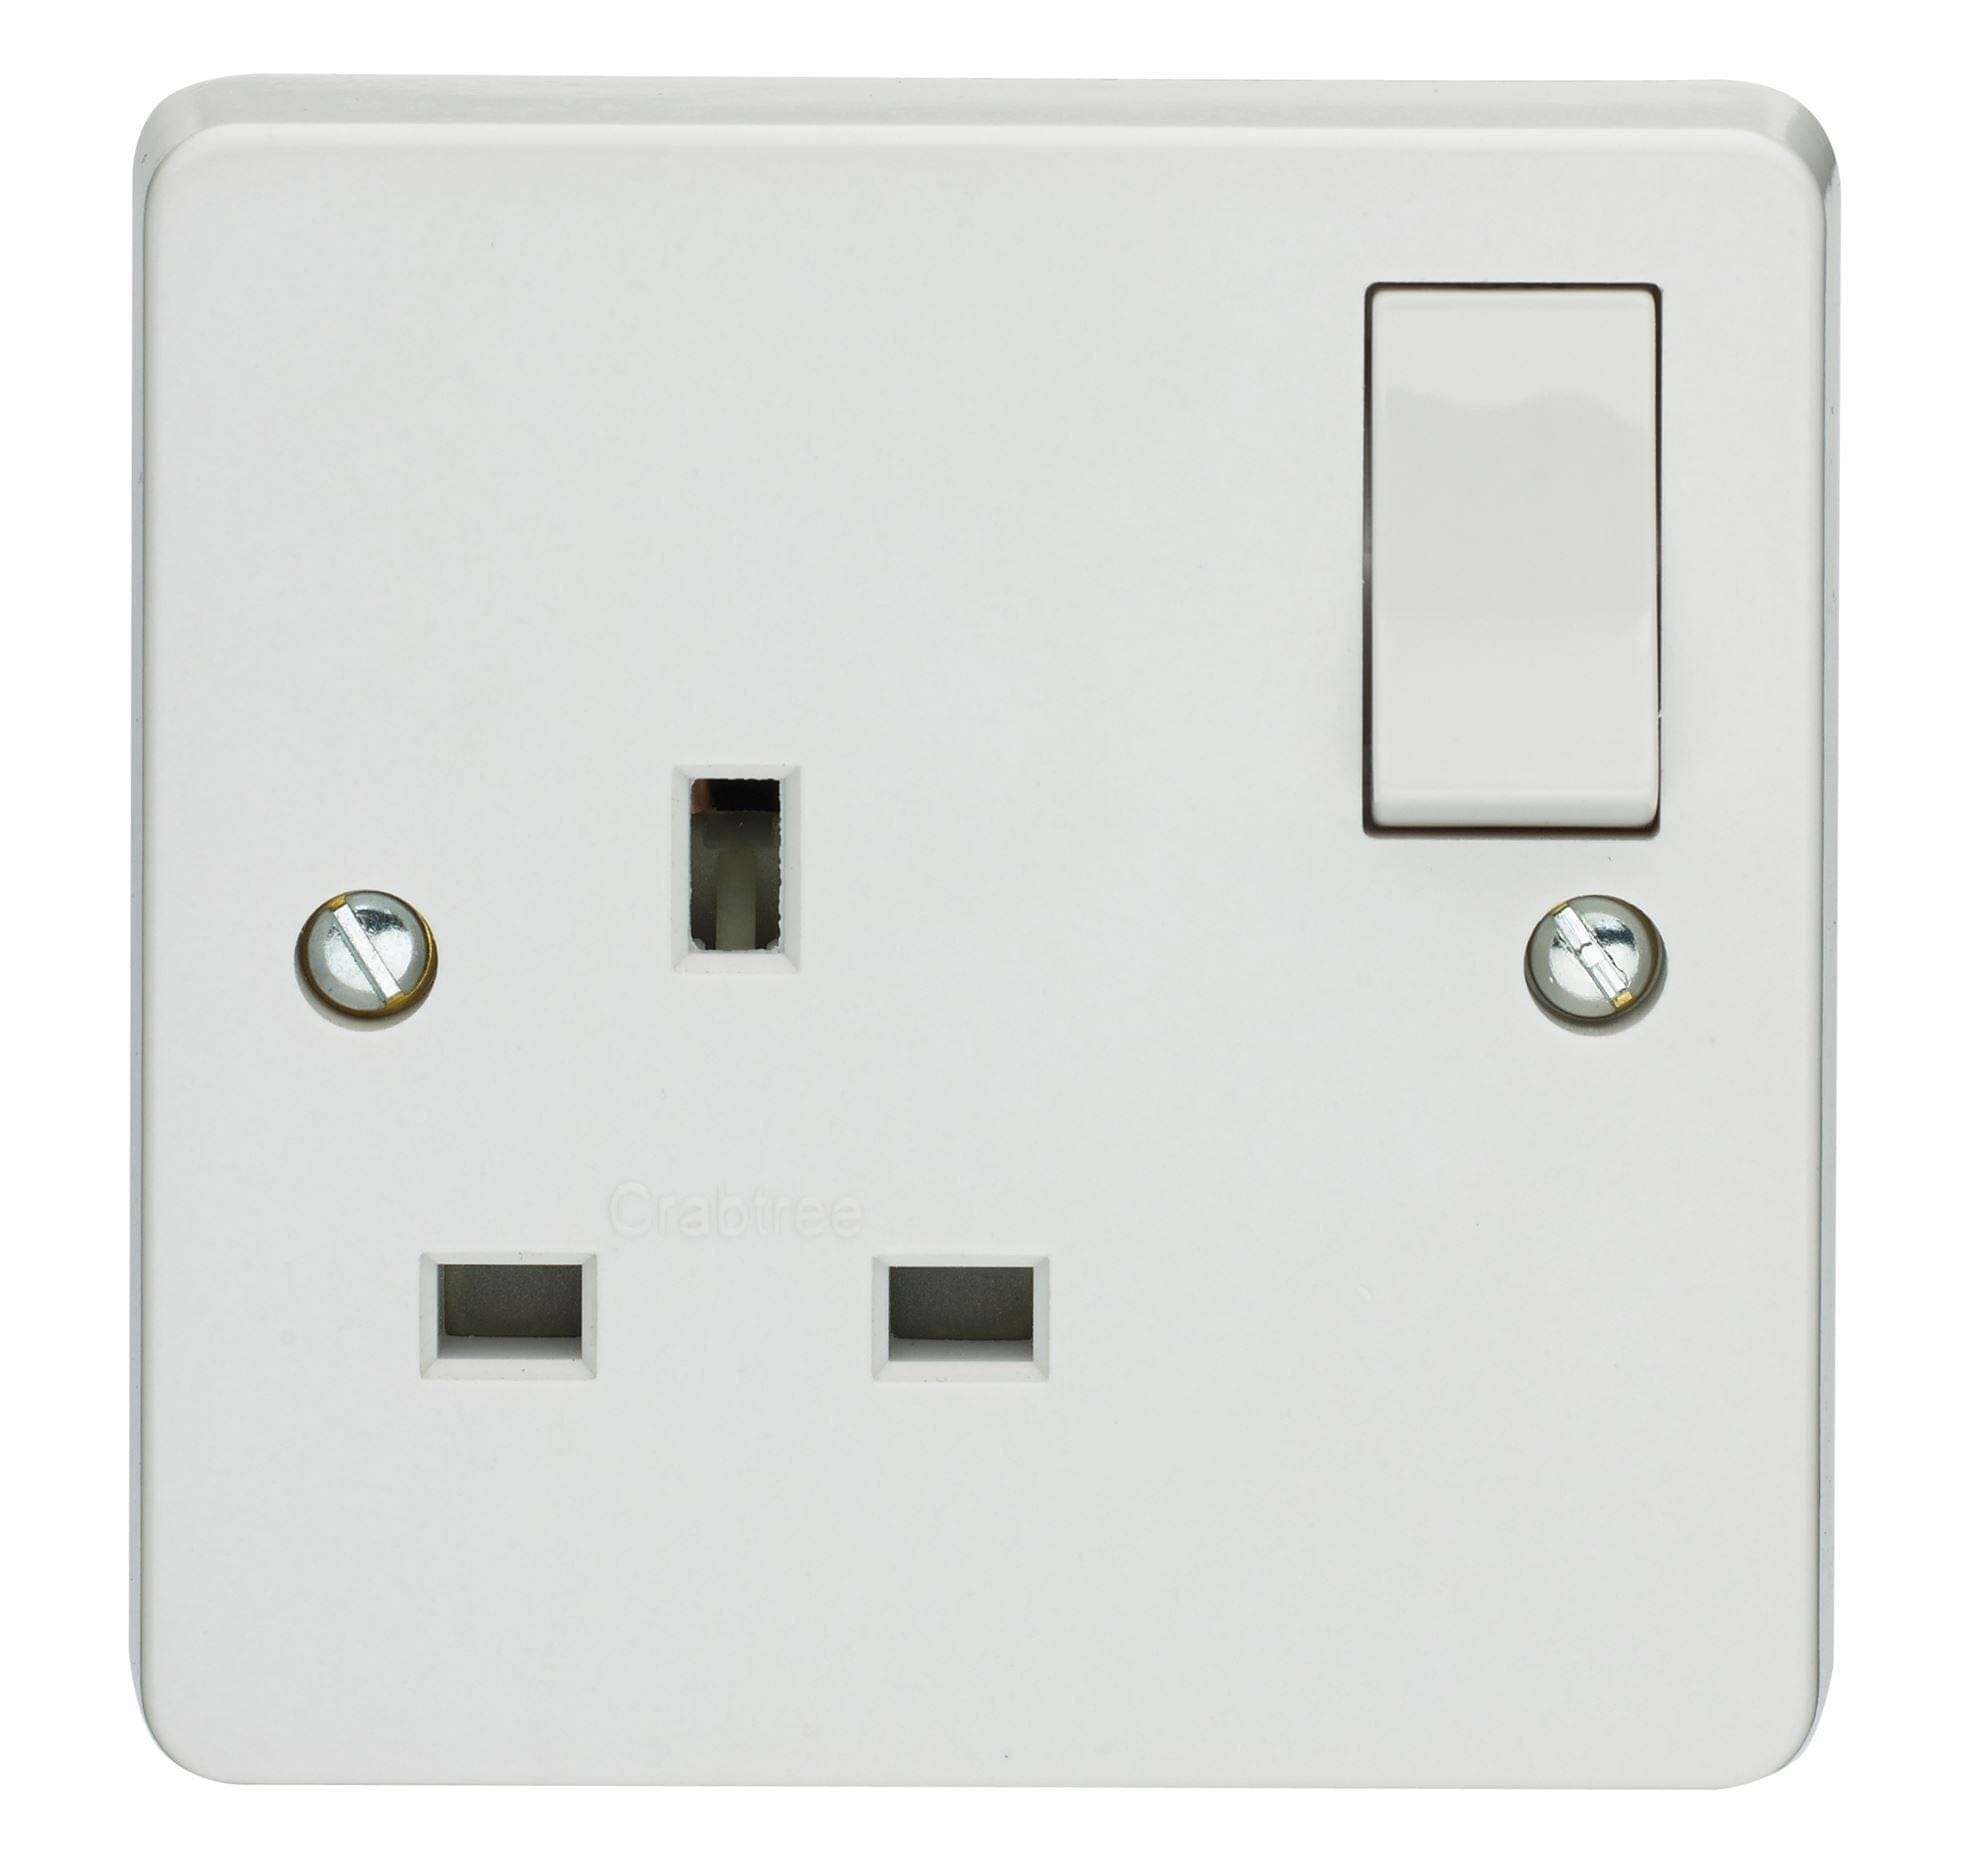 Crabtree White 1 Gang Single Pole Switch Socket 13A | Supply Master | Accra, Ghana Switches & Sockets Buy Tools hardware Building materials